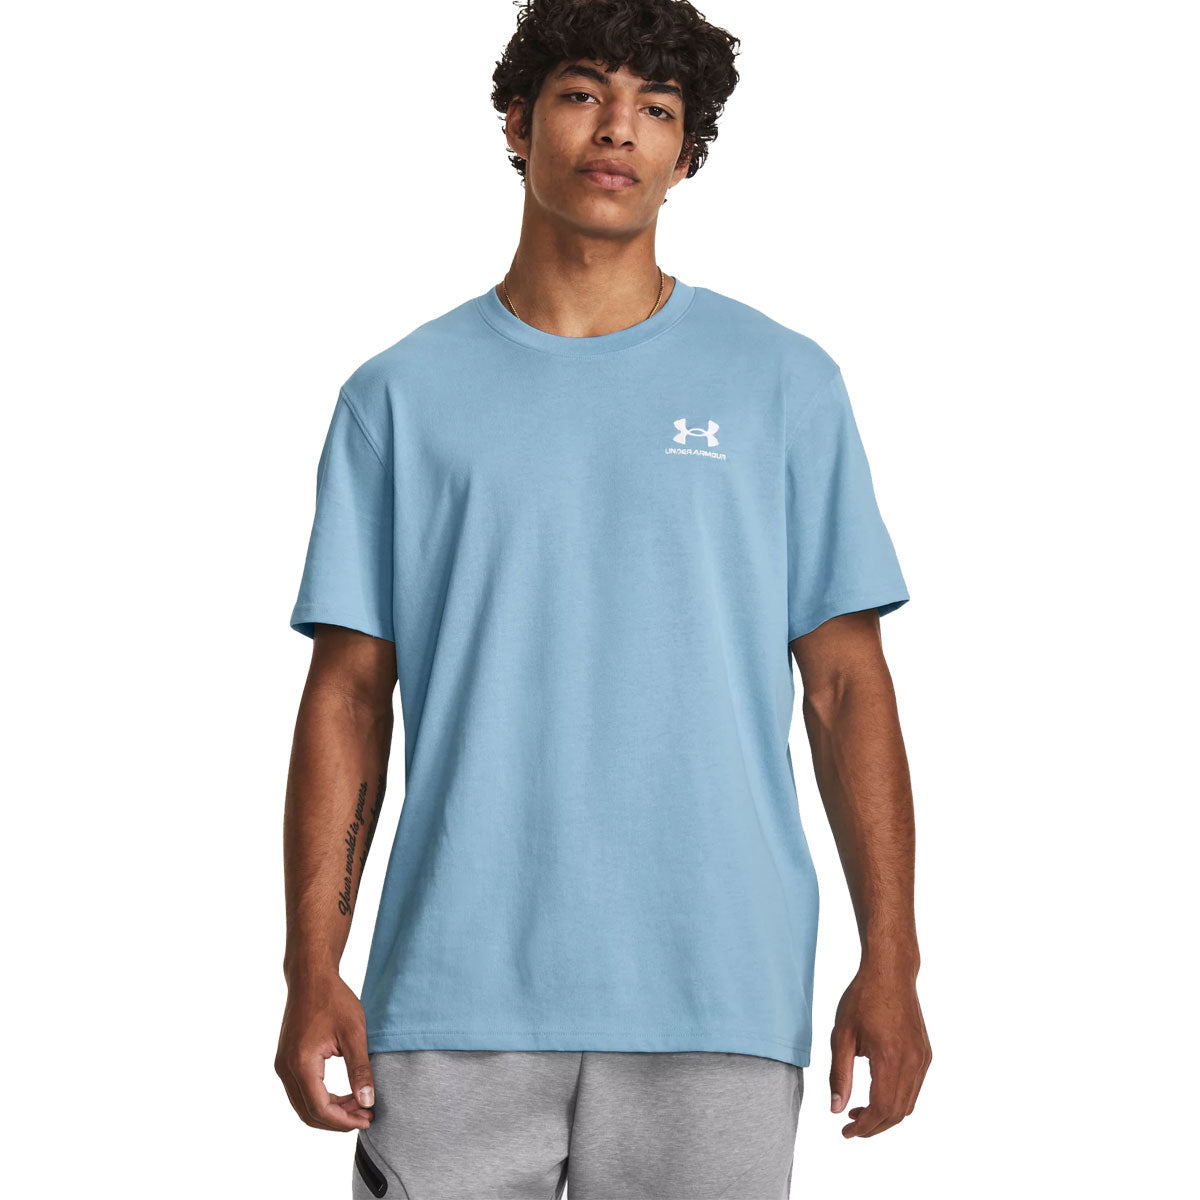 Under Armour Logo Embroidered Heavyweight Tee - Mens - Blizzard/White